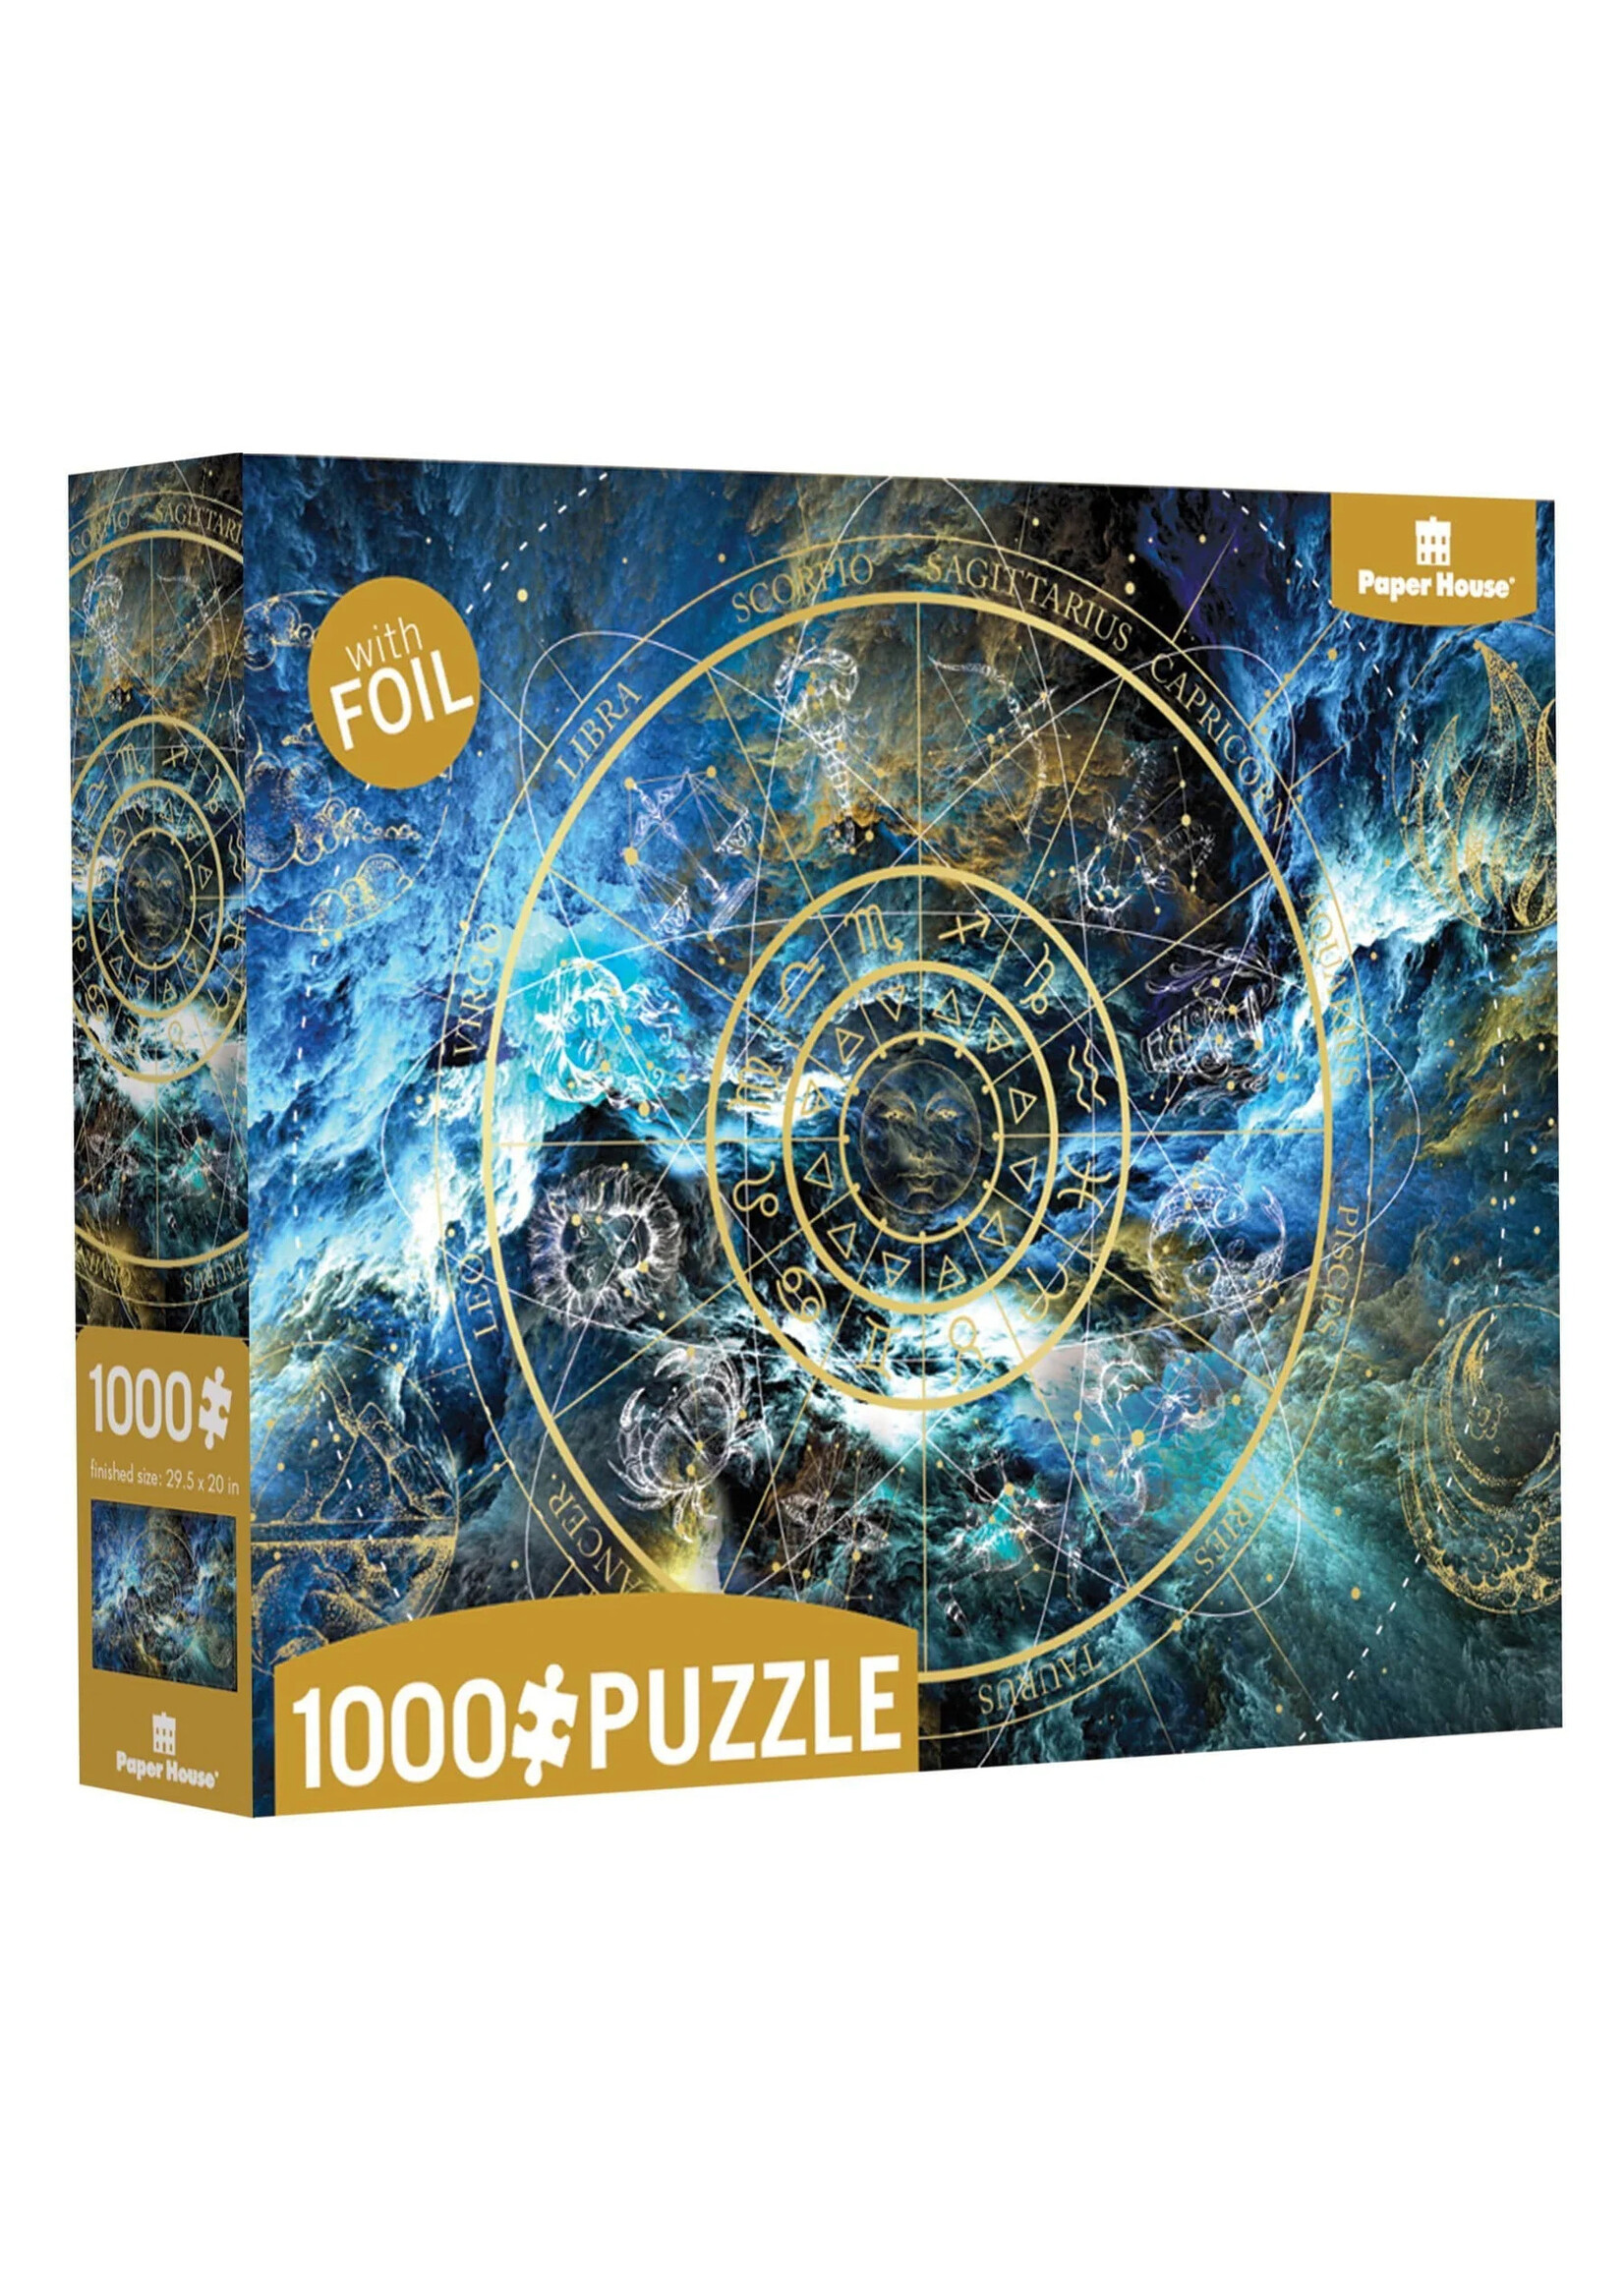 Paper house productions Look to the Stars Foil 1000 piece Puzzle